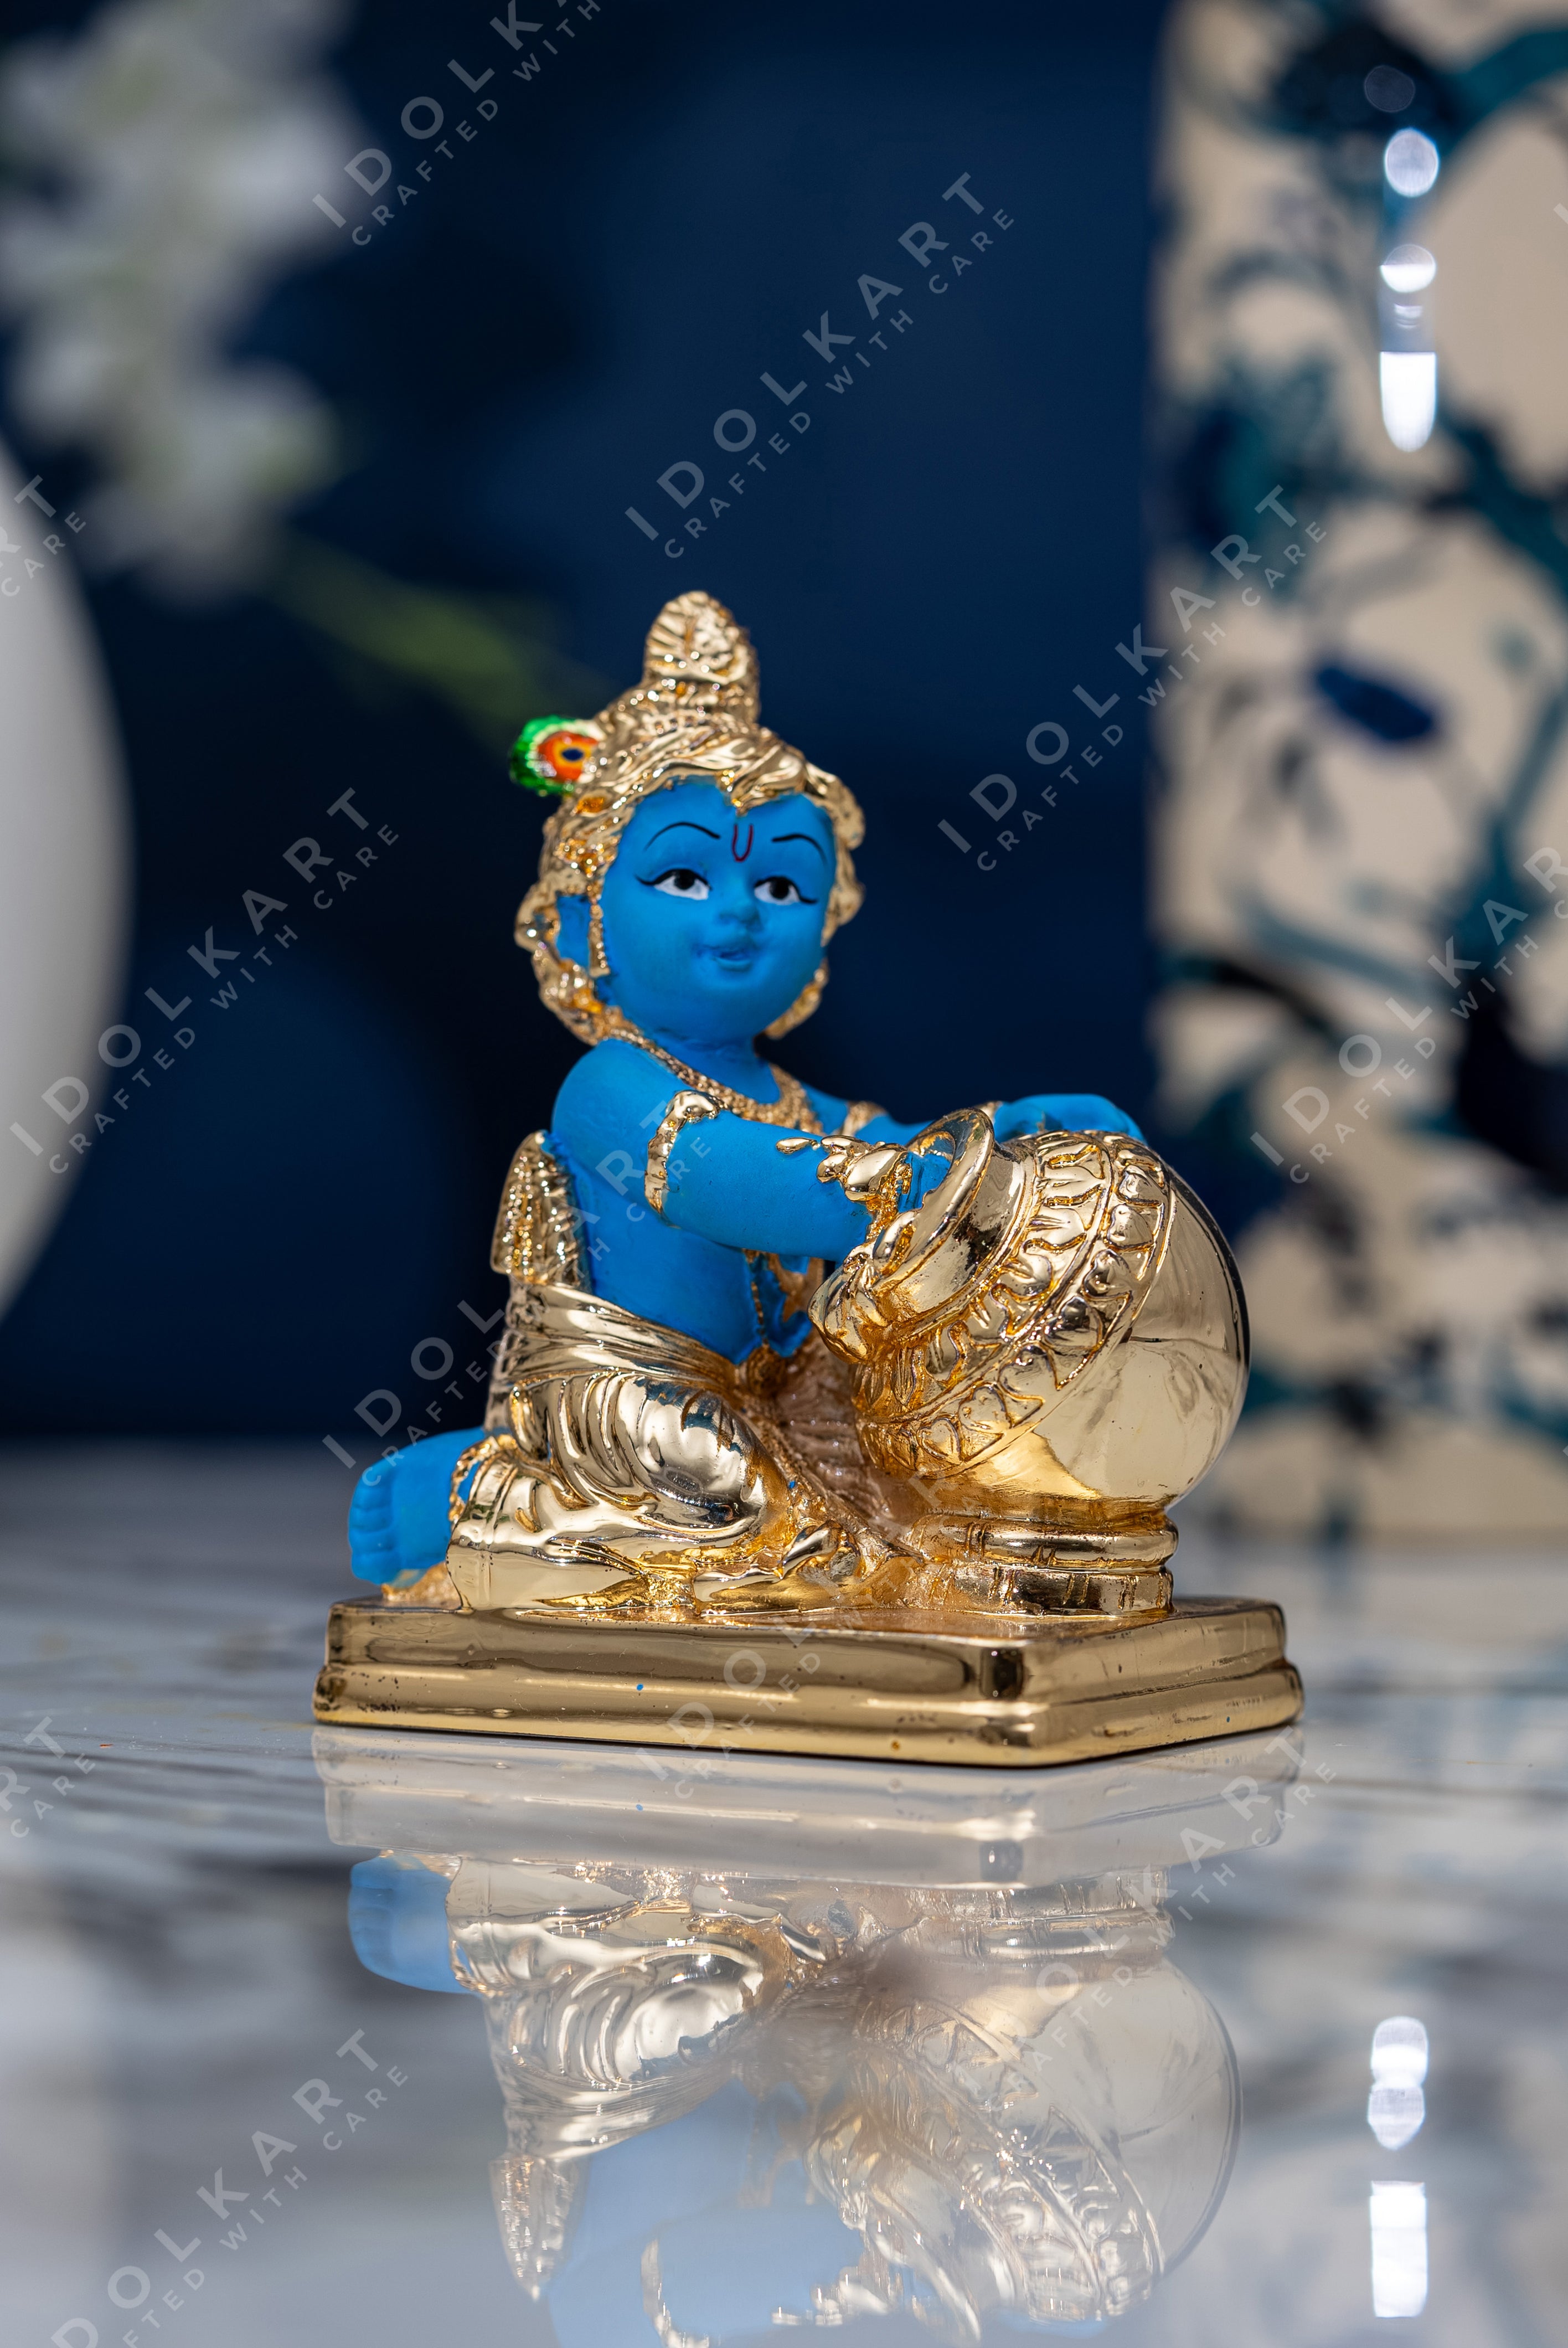 Brass Krishna Idol For Home Office Table Dacor Pooja Room Gift Statue 10